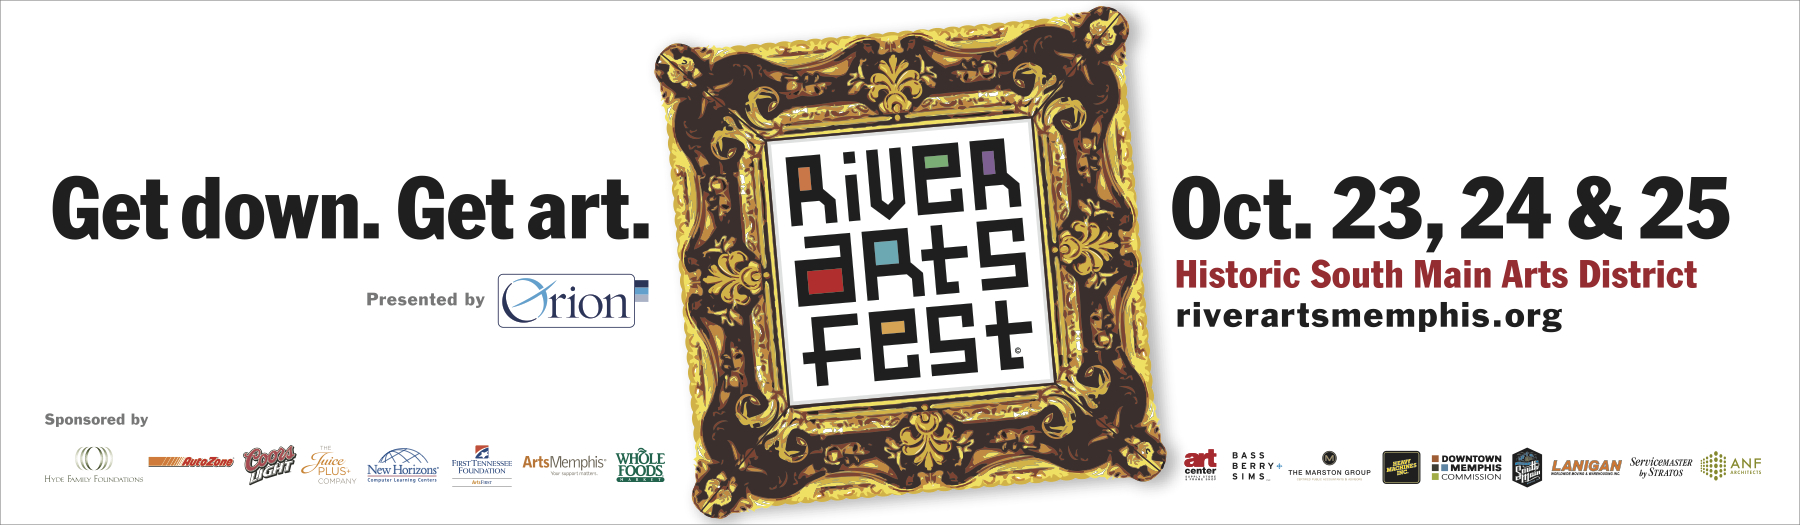  RiverArtsFest “Get Down” outdoor  Branding creative, copywriting and design by Chuck Mitchell 